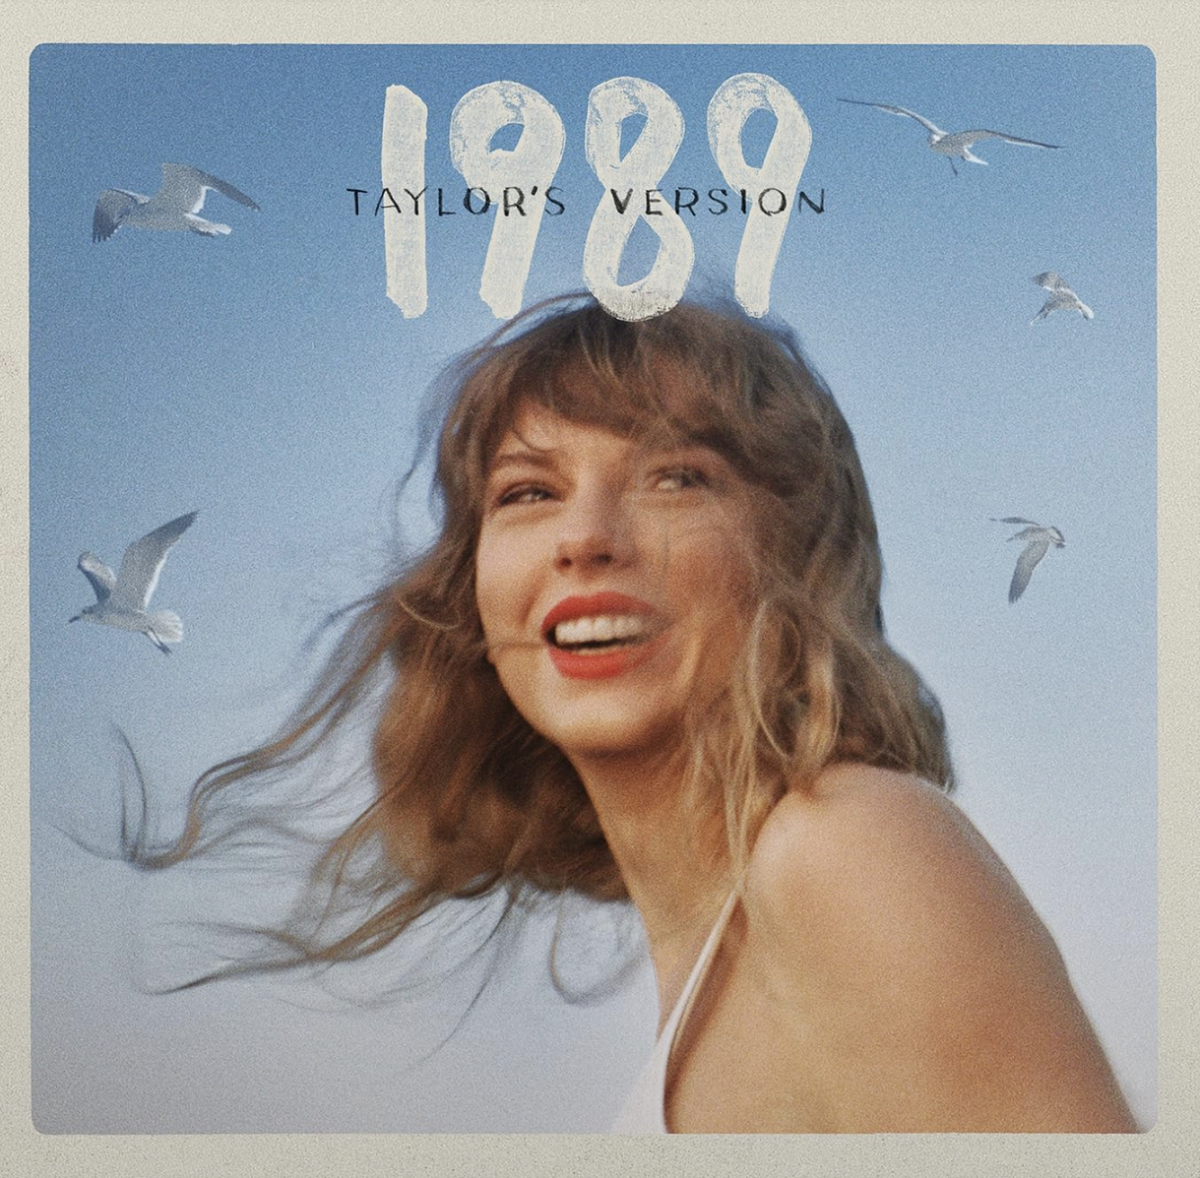 Some+speculate+the+five+seagulls+on+the+new+album+cover%2C+are+the+five+seagulls+%E2%80%9Ctrapped%E2%80%9D+on+Taylor%E2%80%99s+shirt+on+the+original+album+cover%2C+each+representing+a+vault+track.%0A